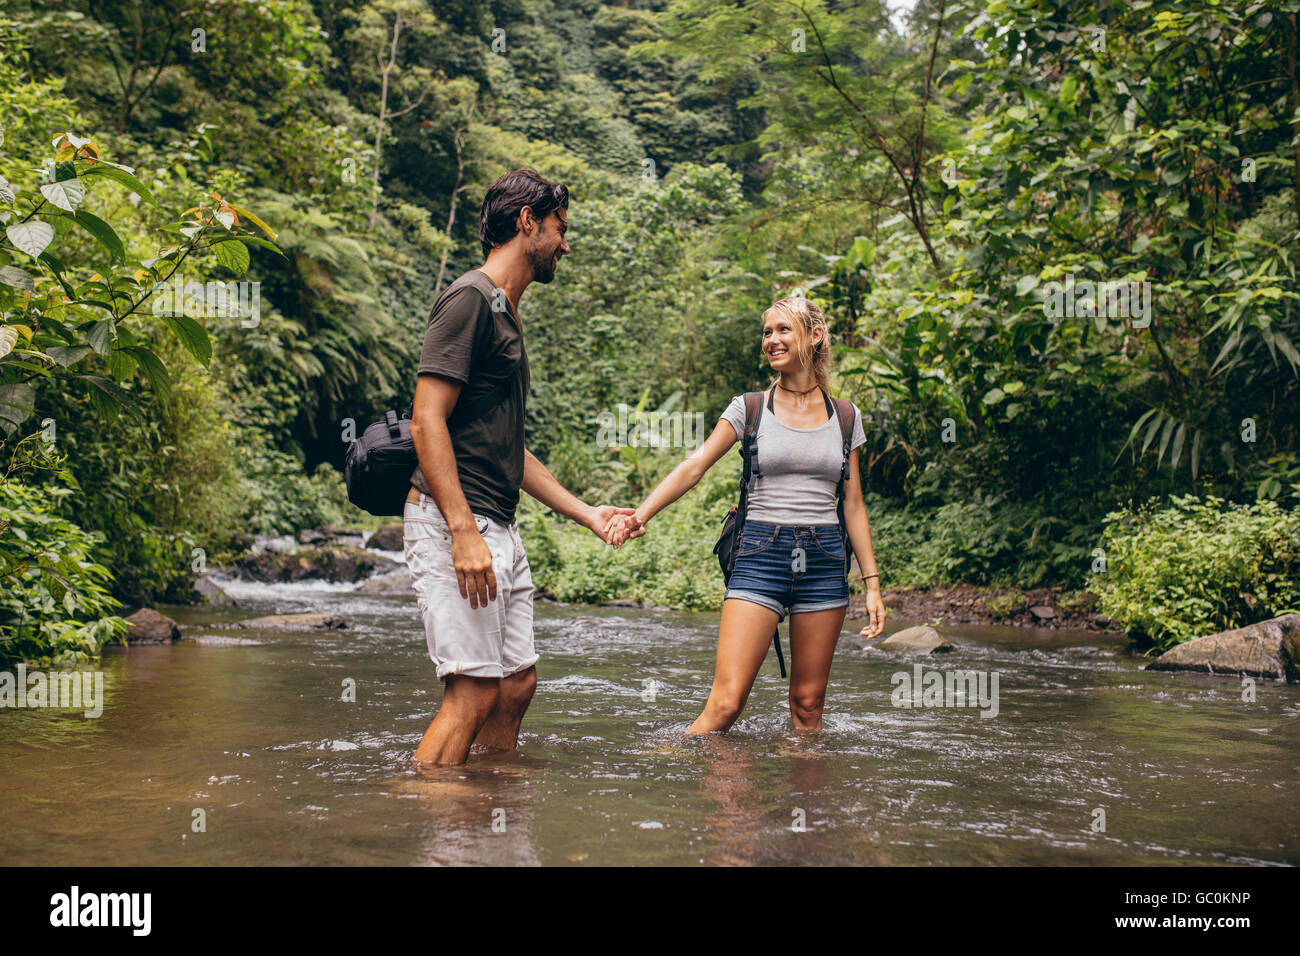 Loving young couple standing in forest stream. Young man and woman standing in river holding hands. Having fun on hiking day. Stock Photo